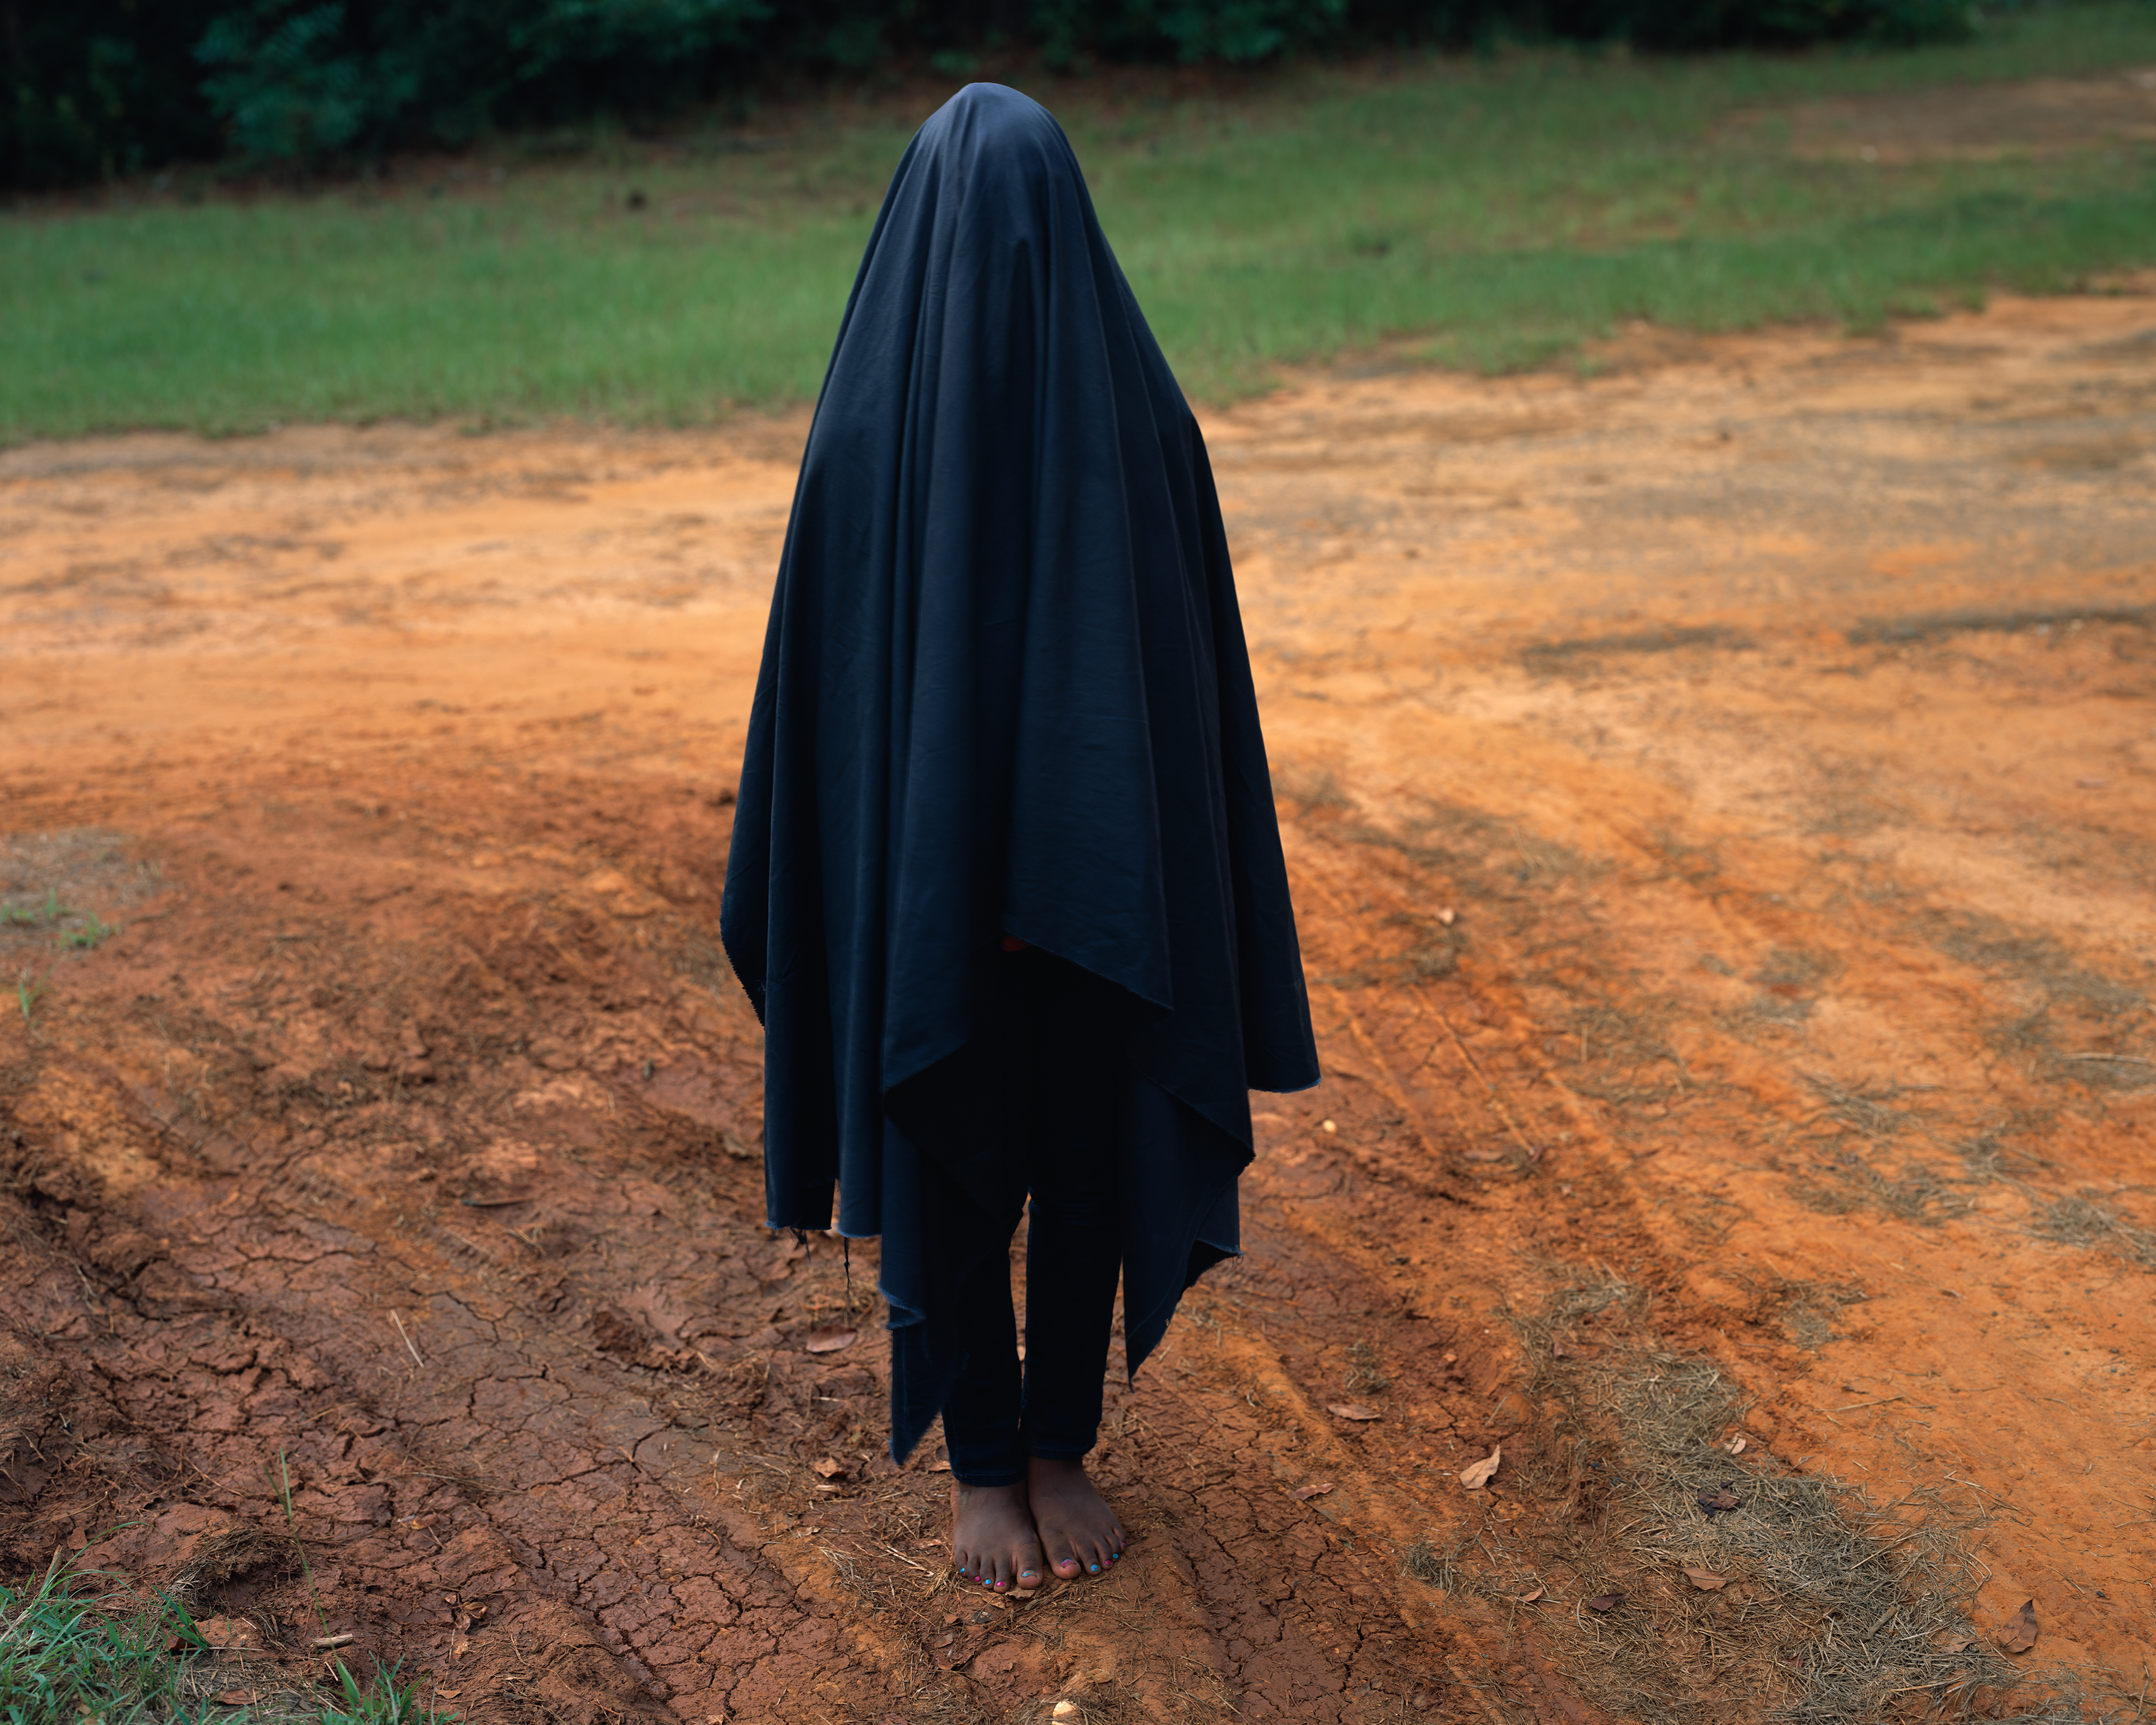 Figure standing barefoot in red dirt, covered in a long black sheet-like material.